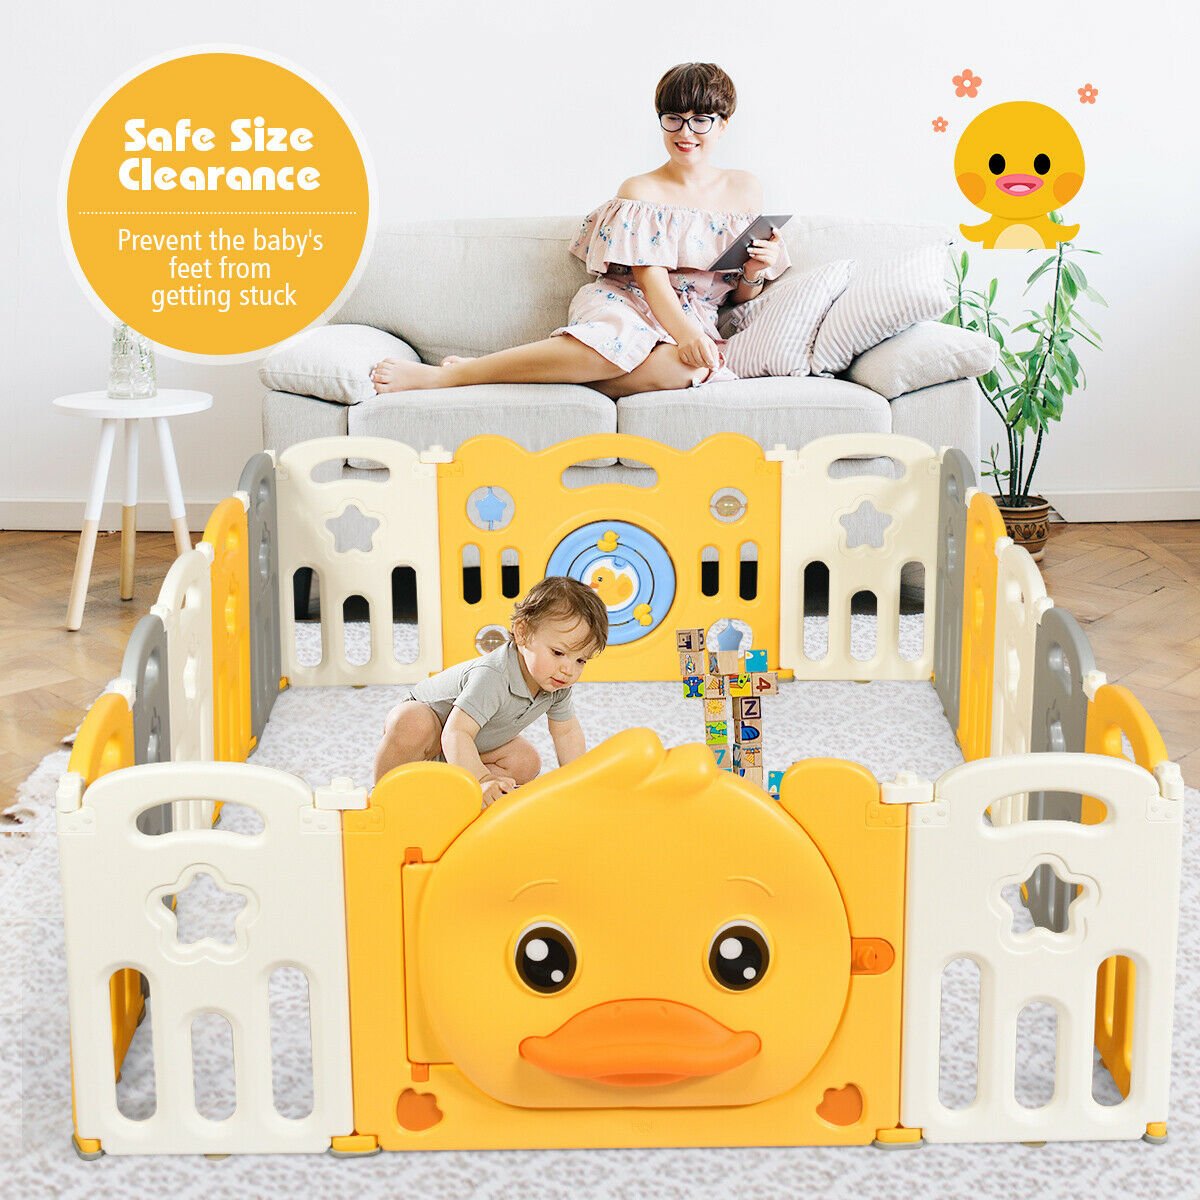 Spacious Baby Playpen - Independent play space for curious toddlers